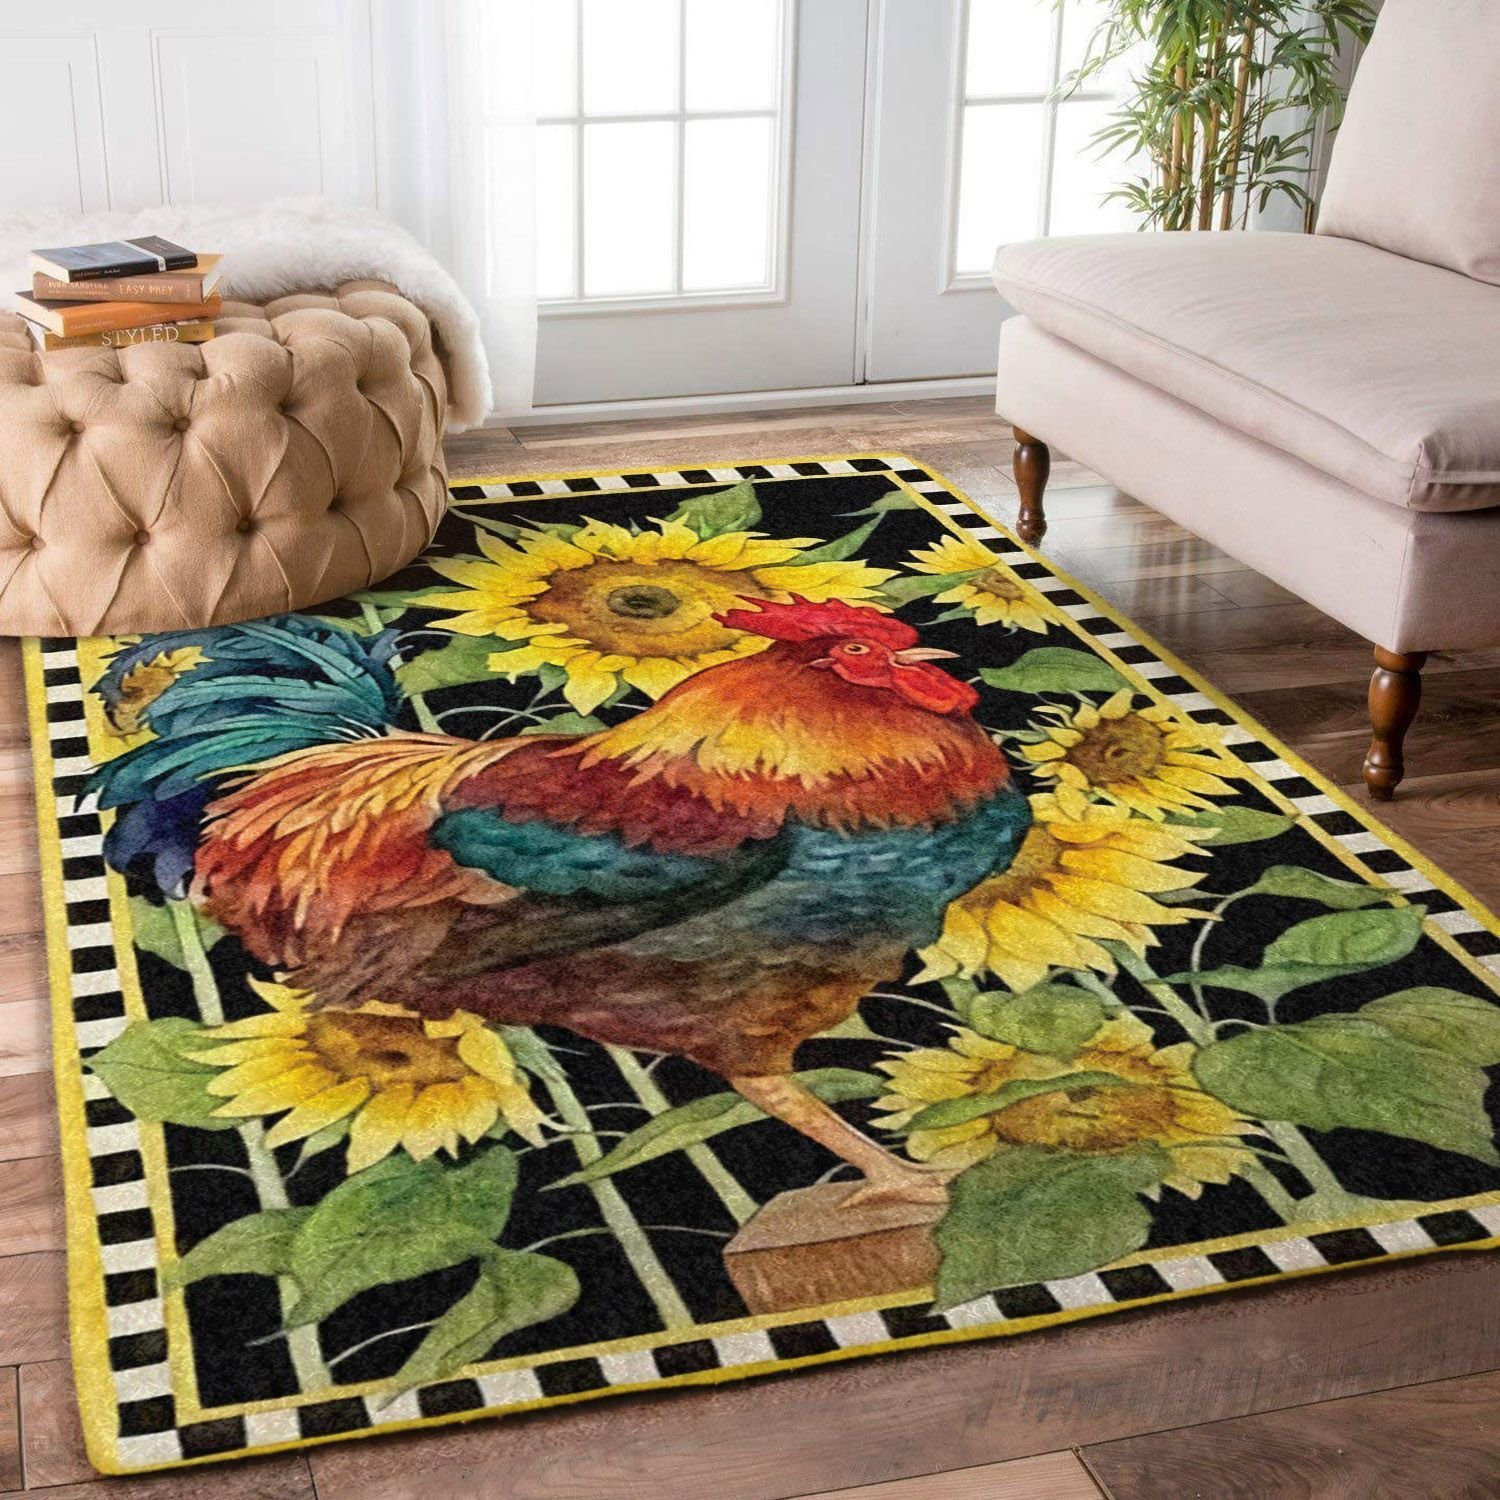 Rustic Rooster Rugs Home Decor PAN